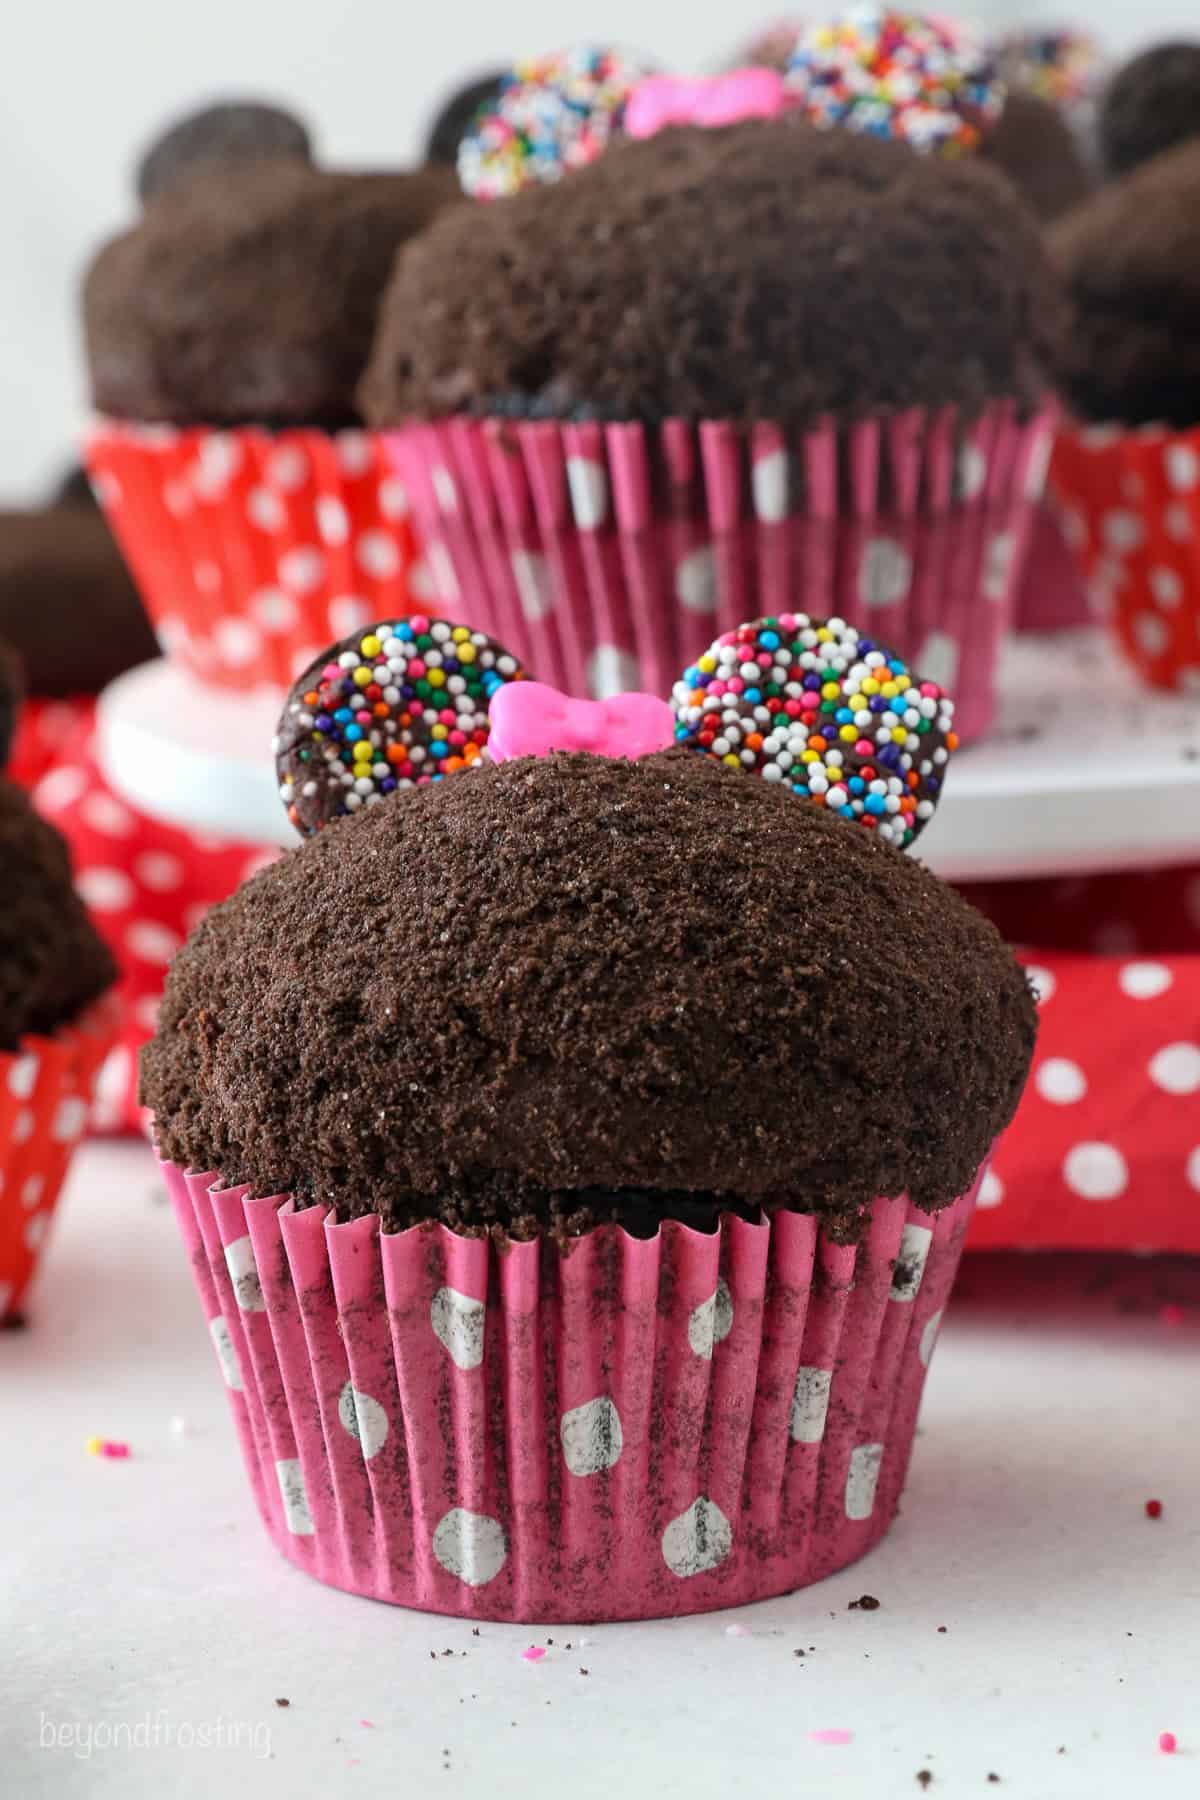 Close up of a Minnie Mouse cupcake with more cupcakes on a plate in the background.